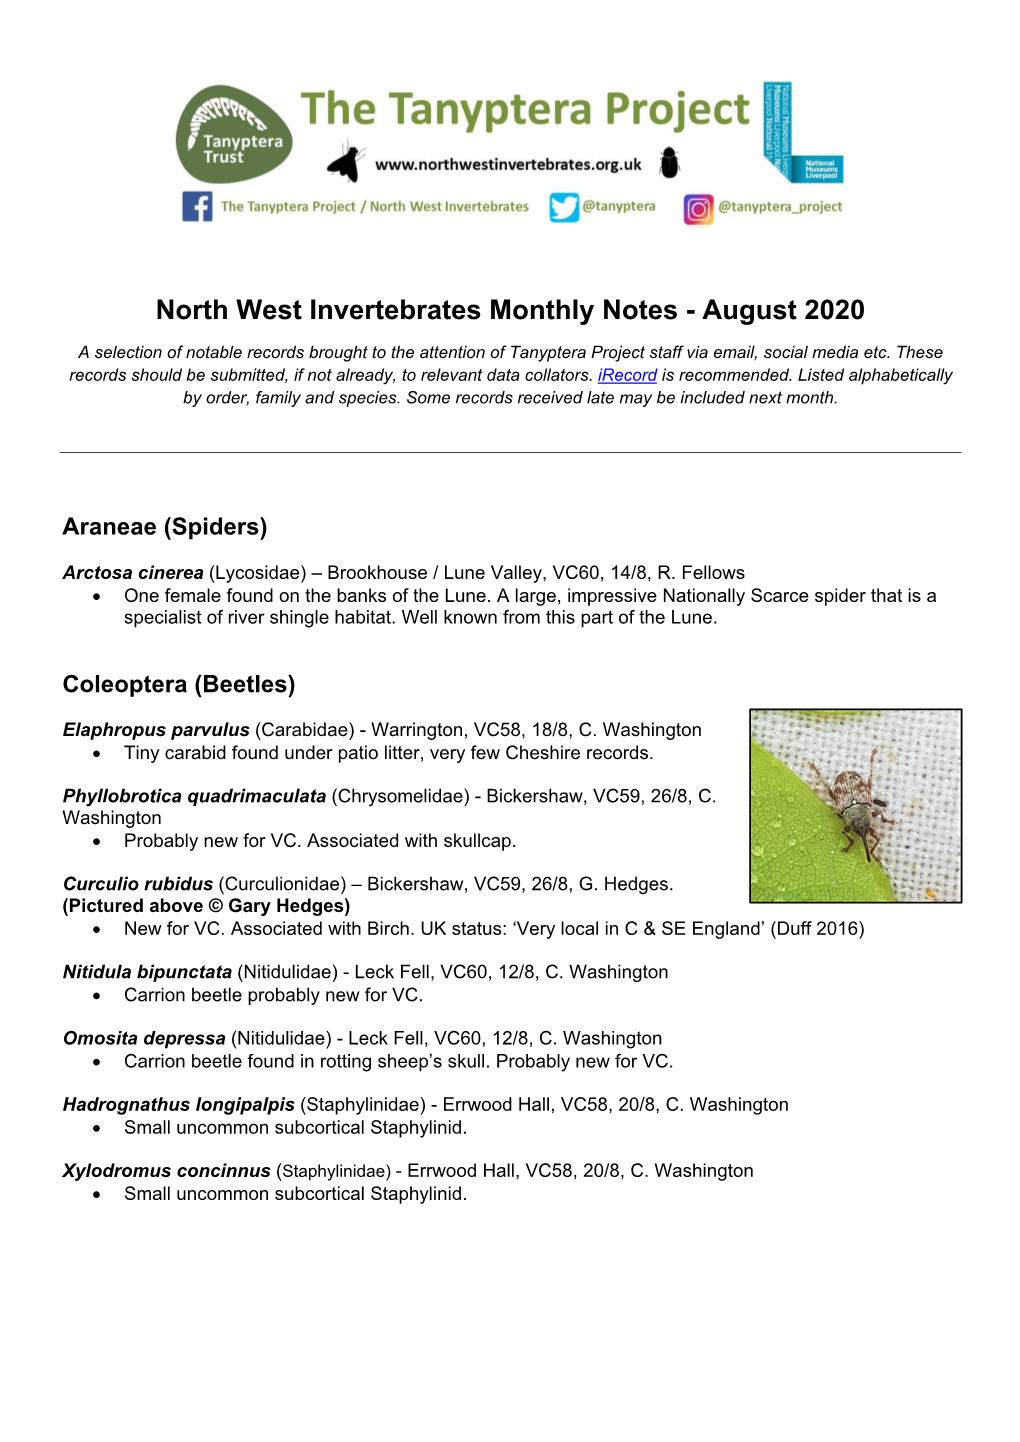 North West Invertebrates Monthly Notes - August 2020 a Selection of Notable Records Brought to the Attention of Tanyptera Project Staff Via Email, Social Media Etc